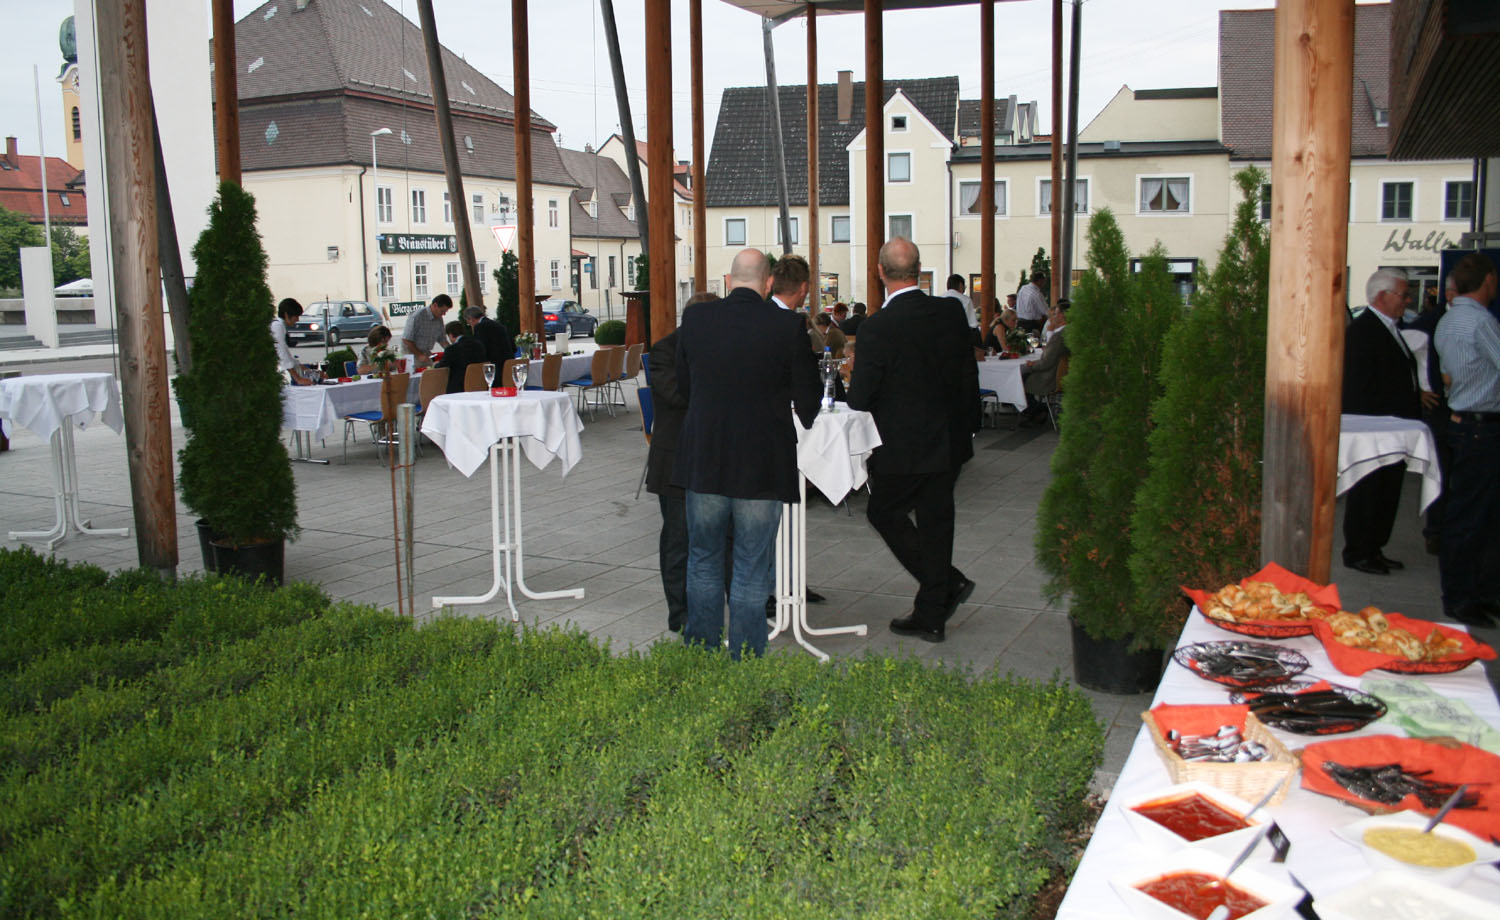 Overview of the museum forecourt with bar tables